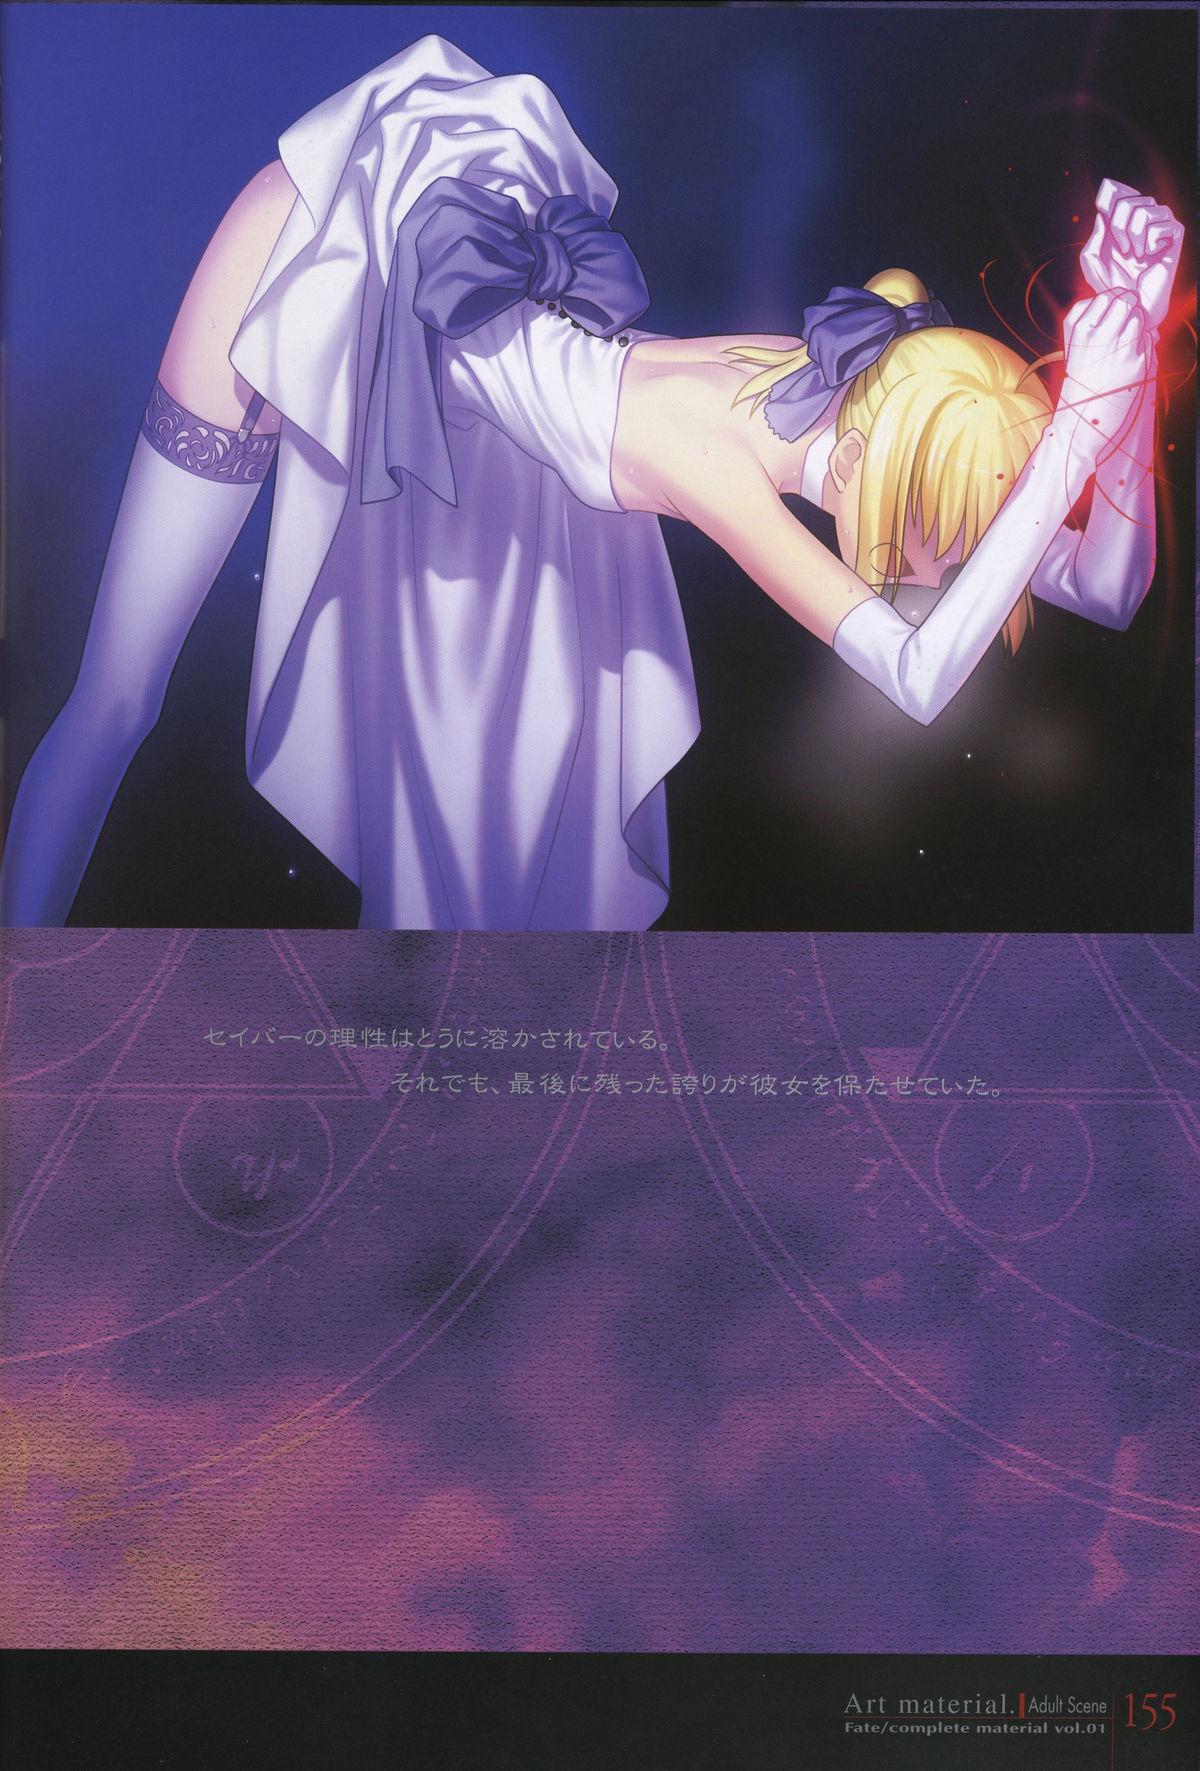 Fate/complete material I - Art material. 159